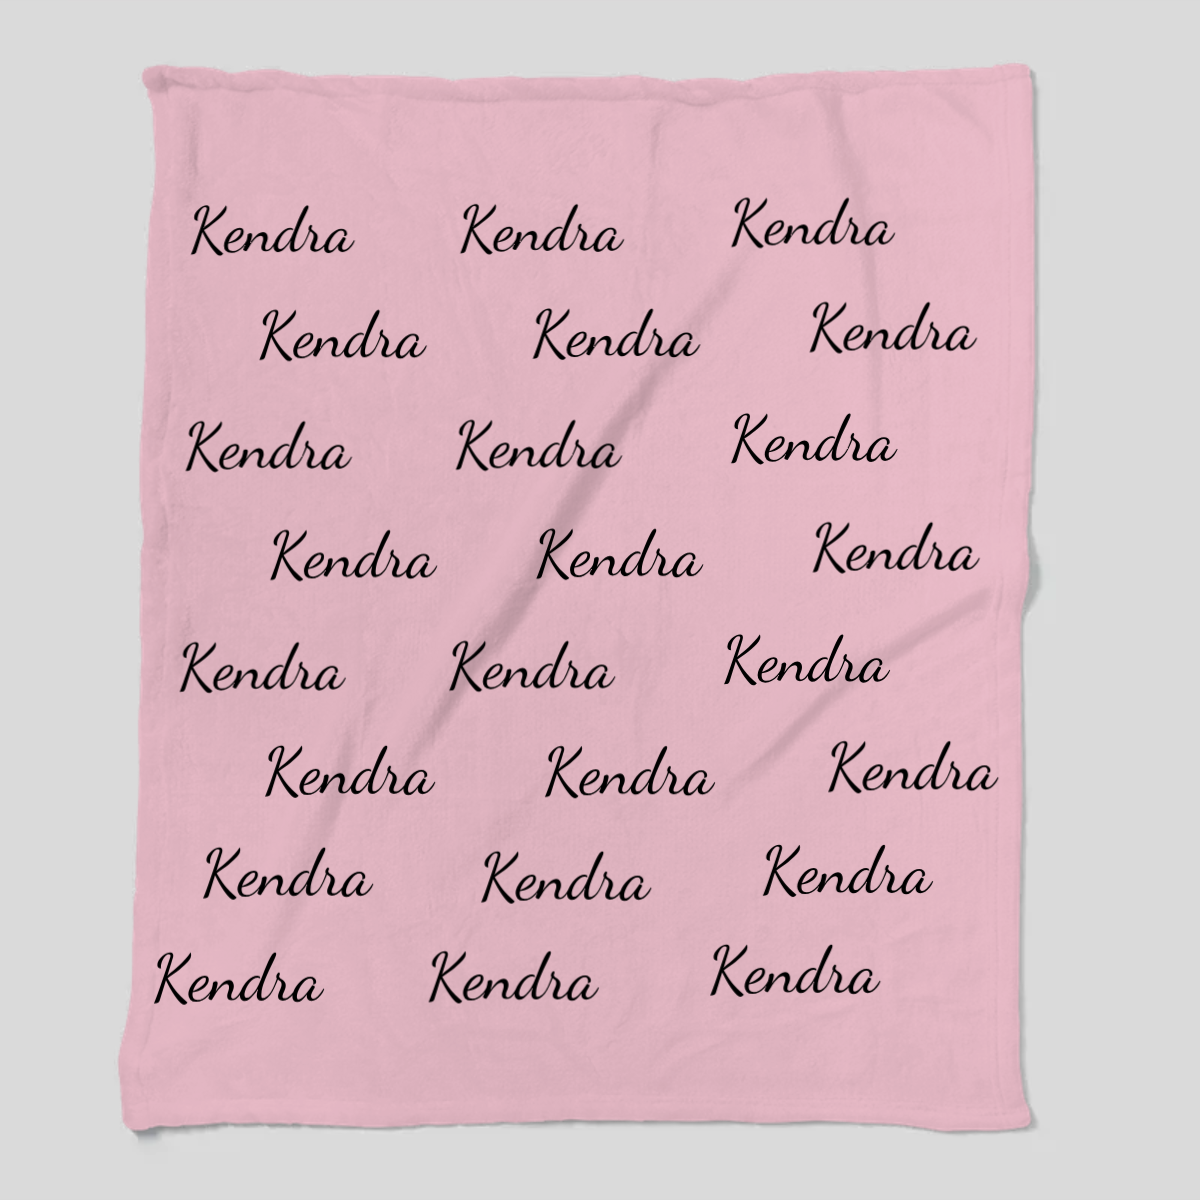 Personalized Blanket for Kids, Baby, Teenagers, Adults, Mom, Dad – 50x60 Sizes and 9 Plus Colors, Custom Name Cozy Plush Fleece Blanket